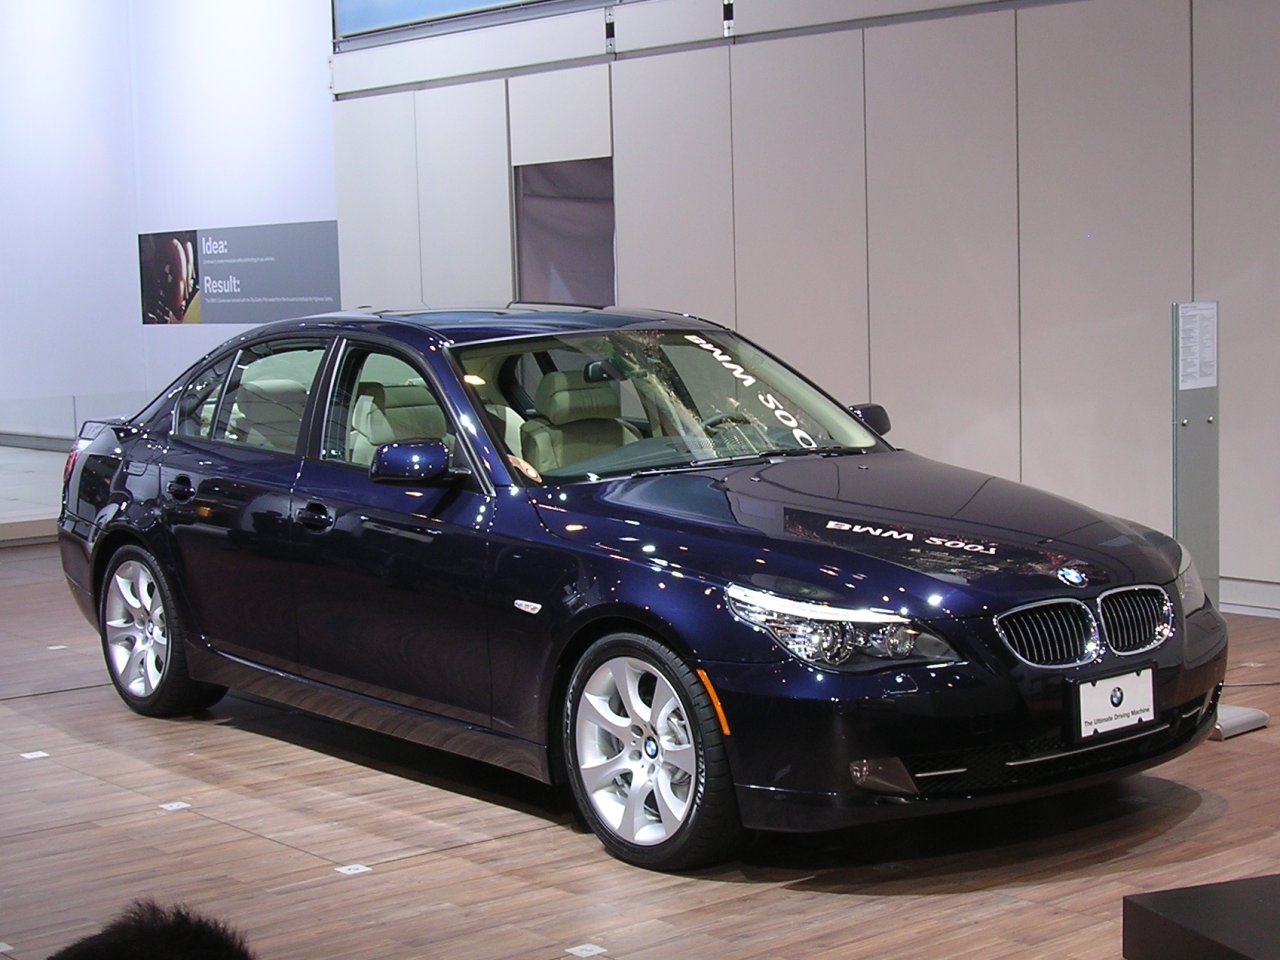   on Bmw 5 Series   Articles  Features  Gallery  Photos  Buy Cars   Go